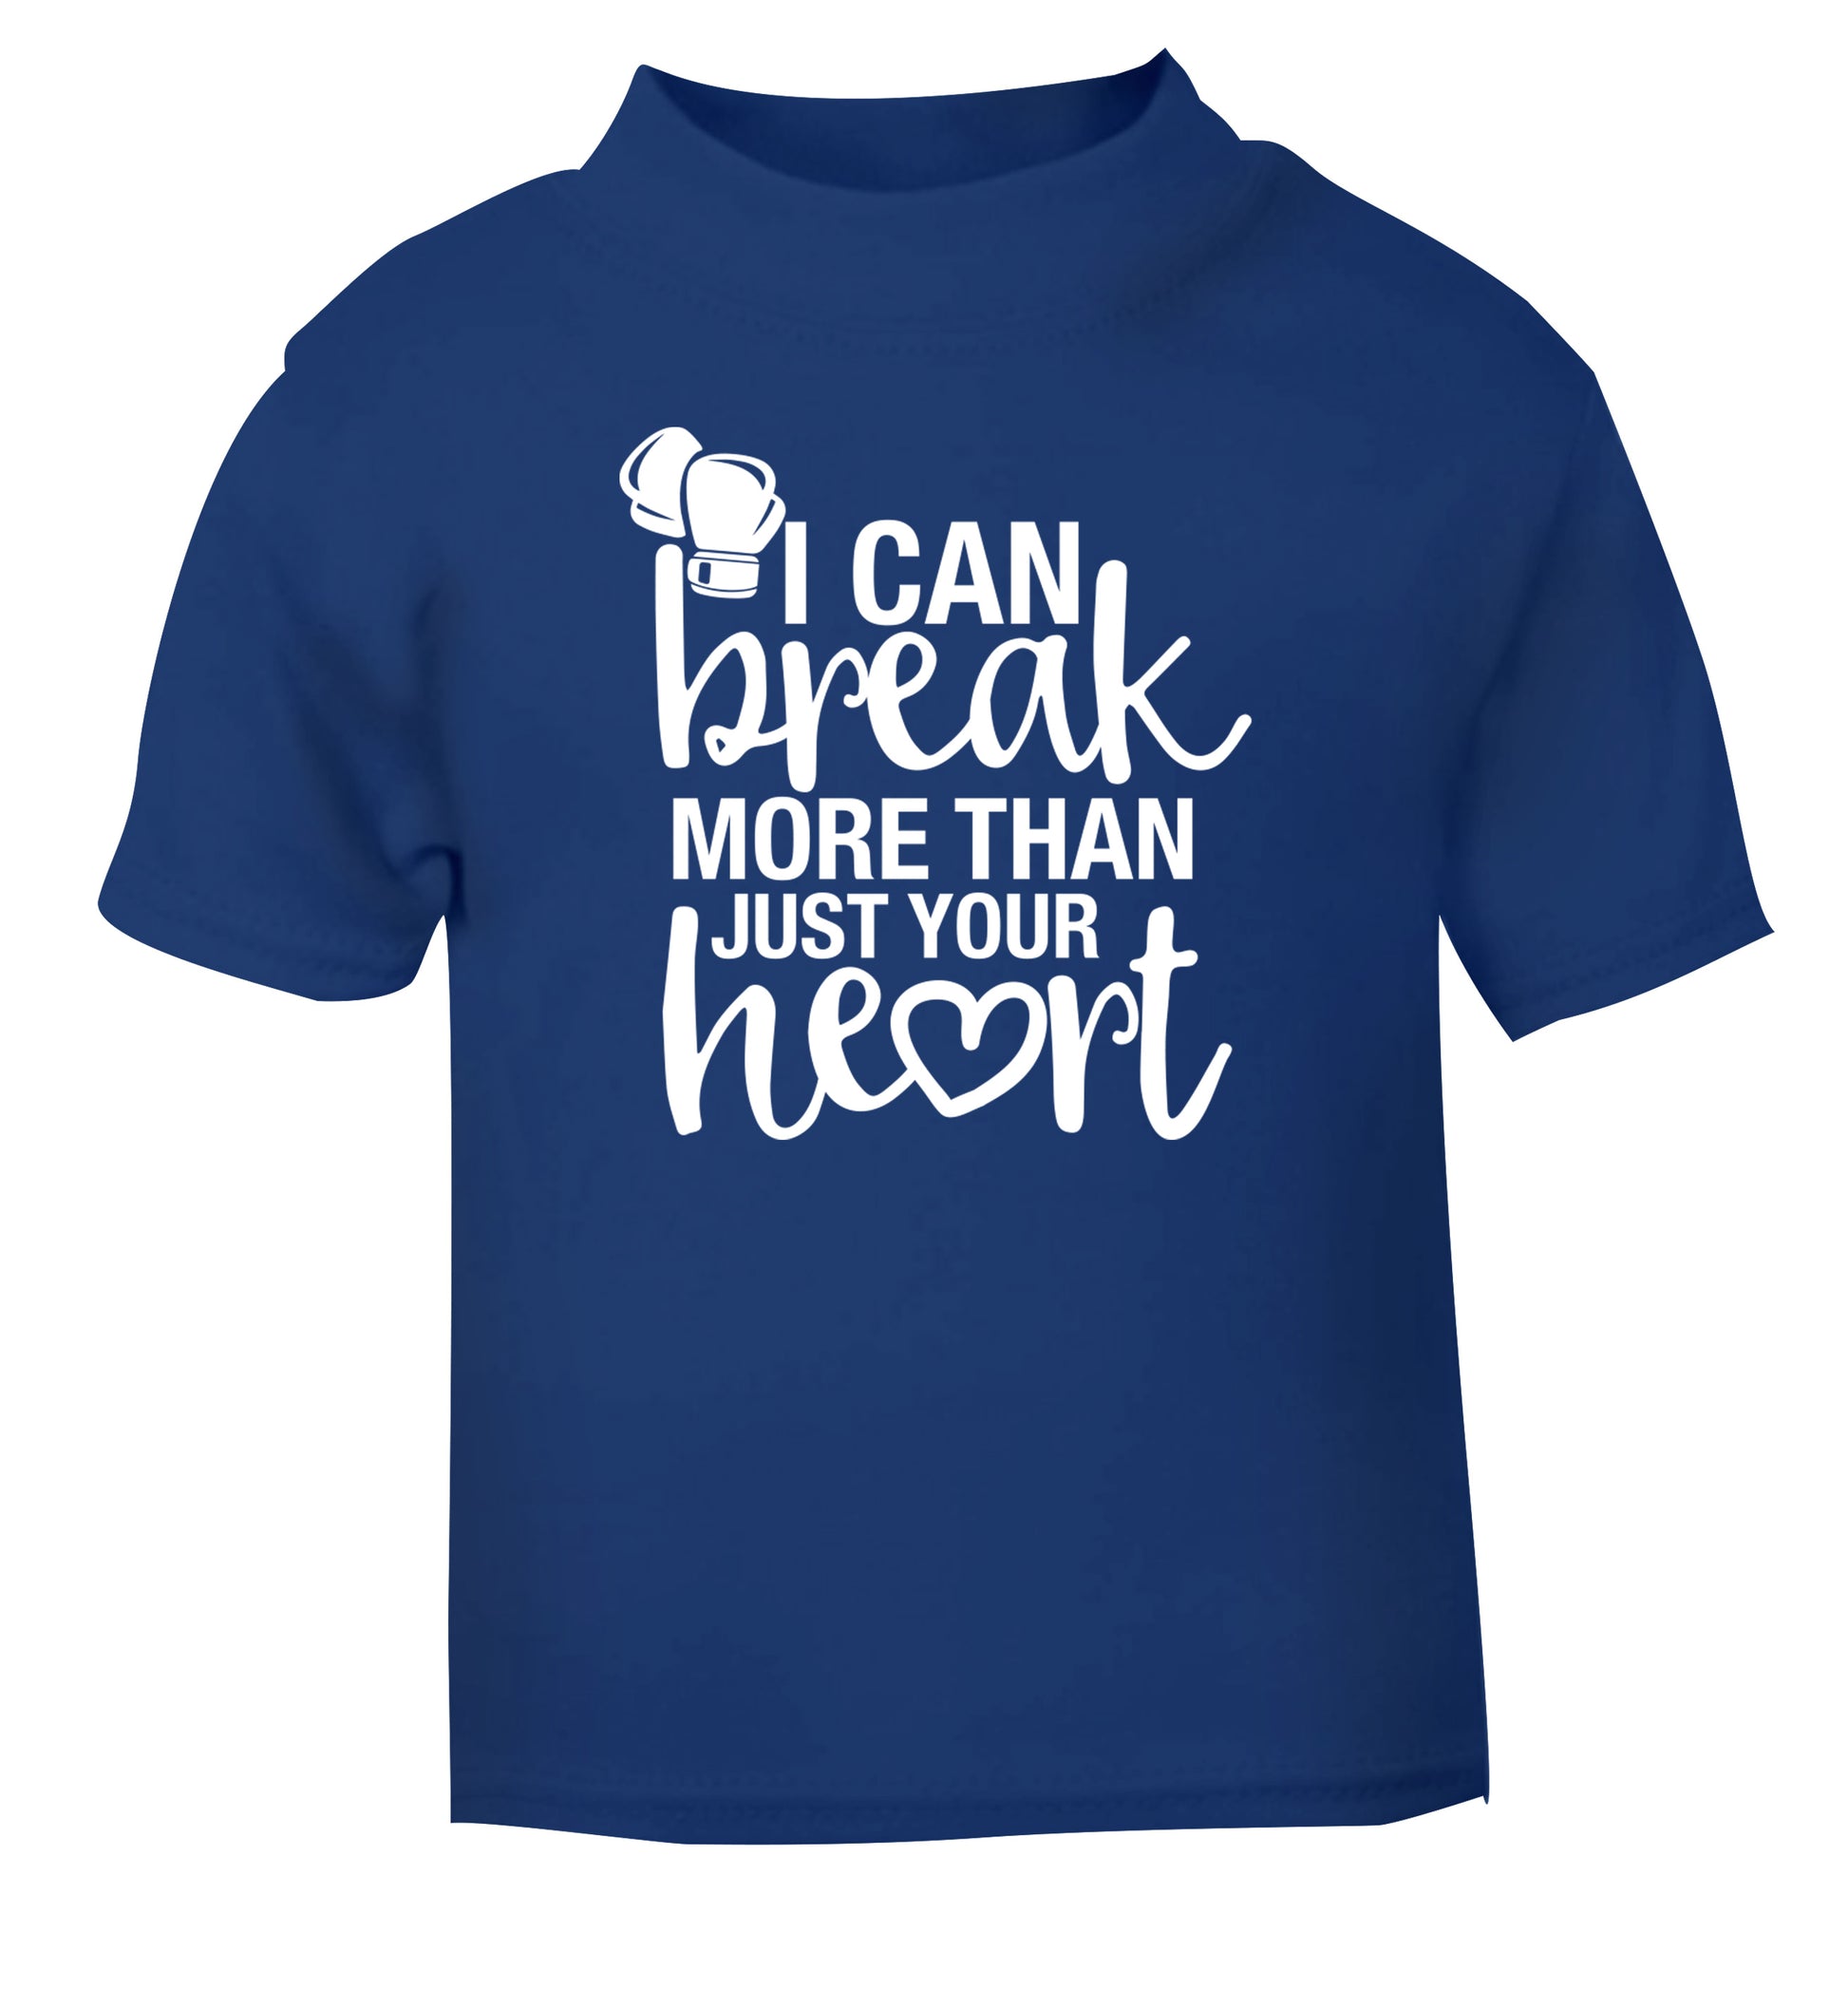 I can break more than just your heart blue Baby Toddler Tshirt 2 Years